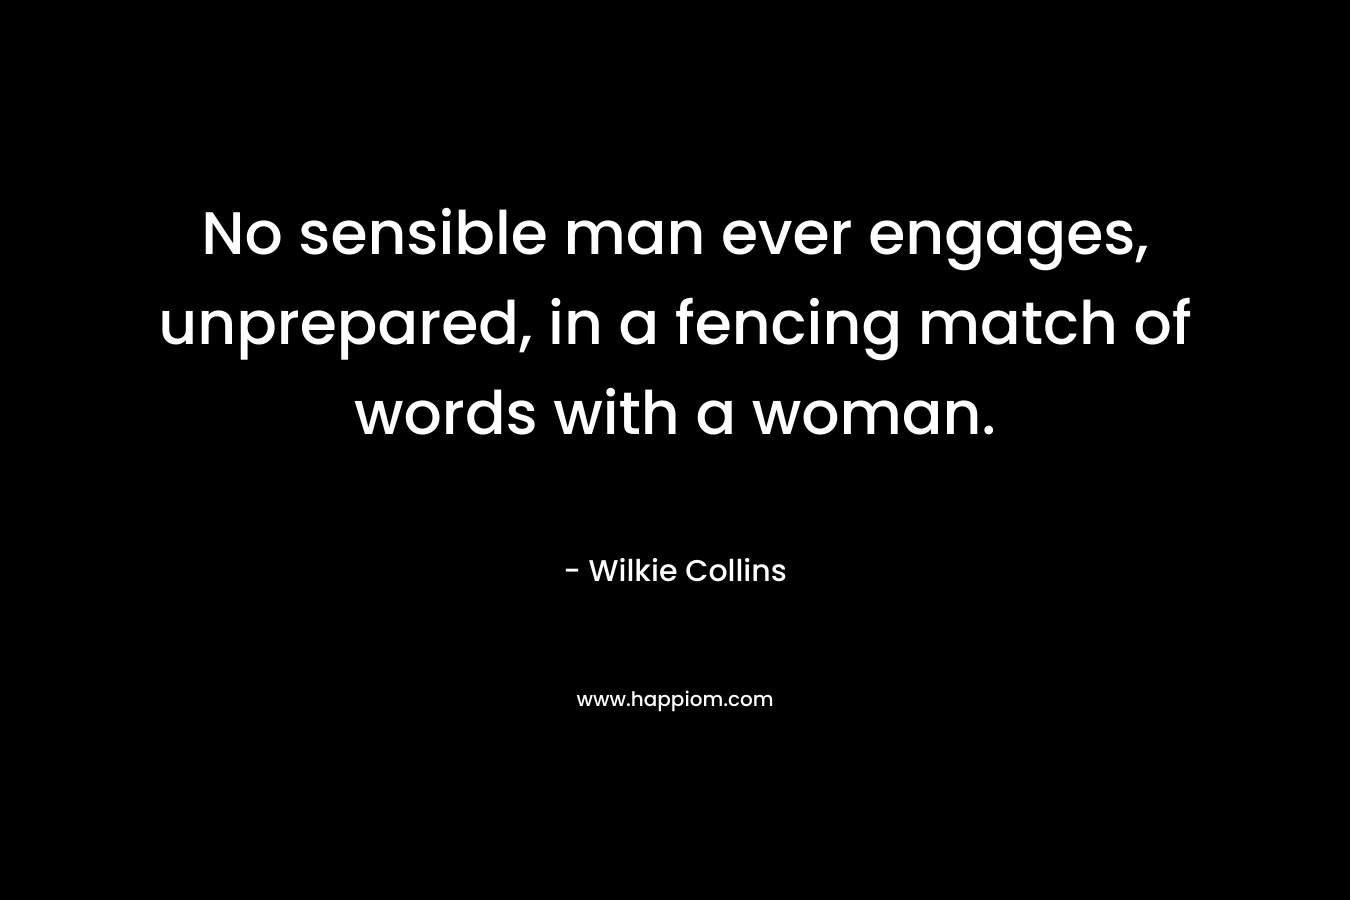 No sensible man ever engages, unprepared, in a fencing match of words with a woman. – Wilkie Collins